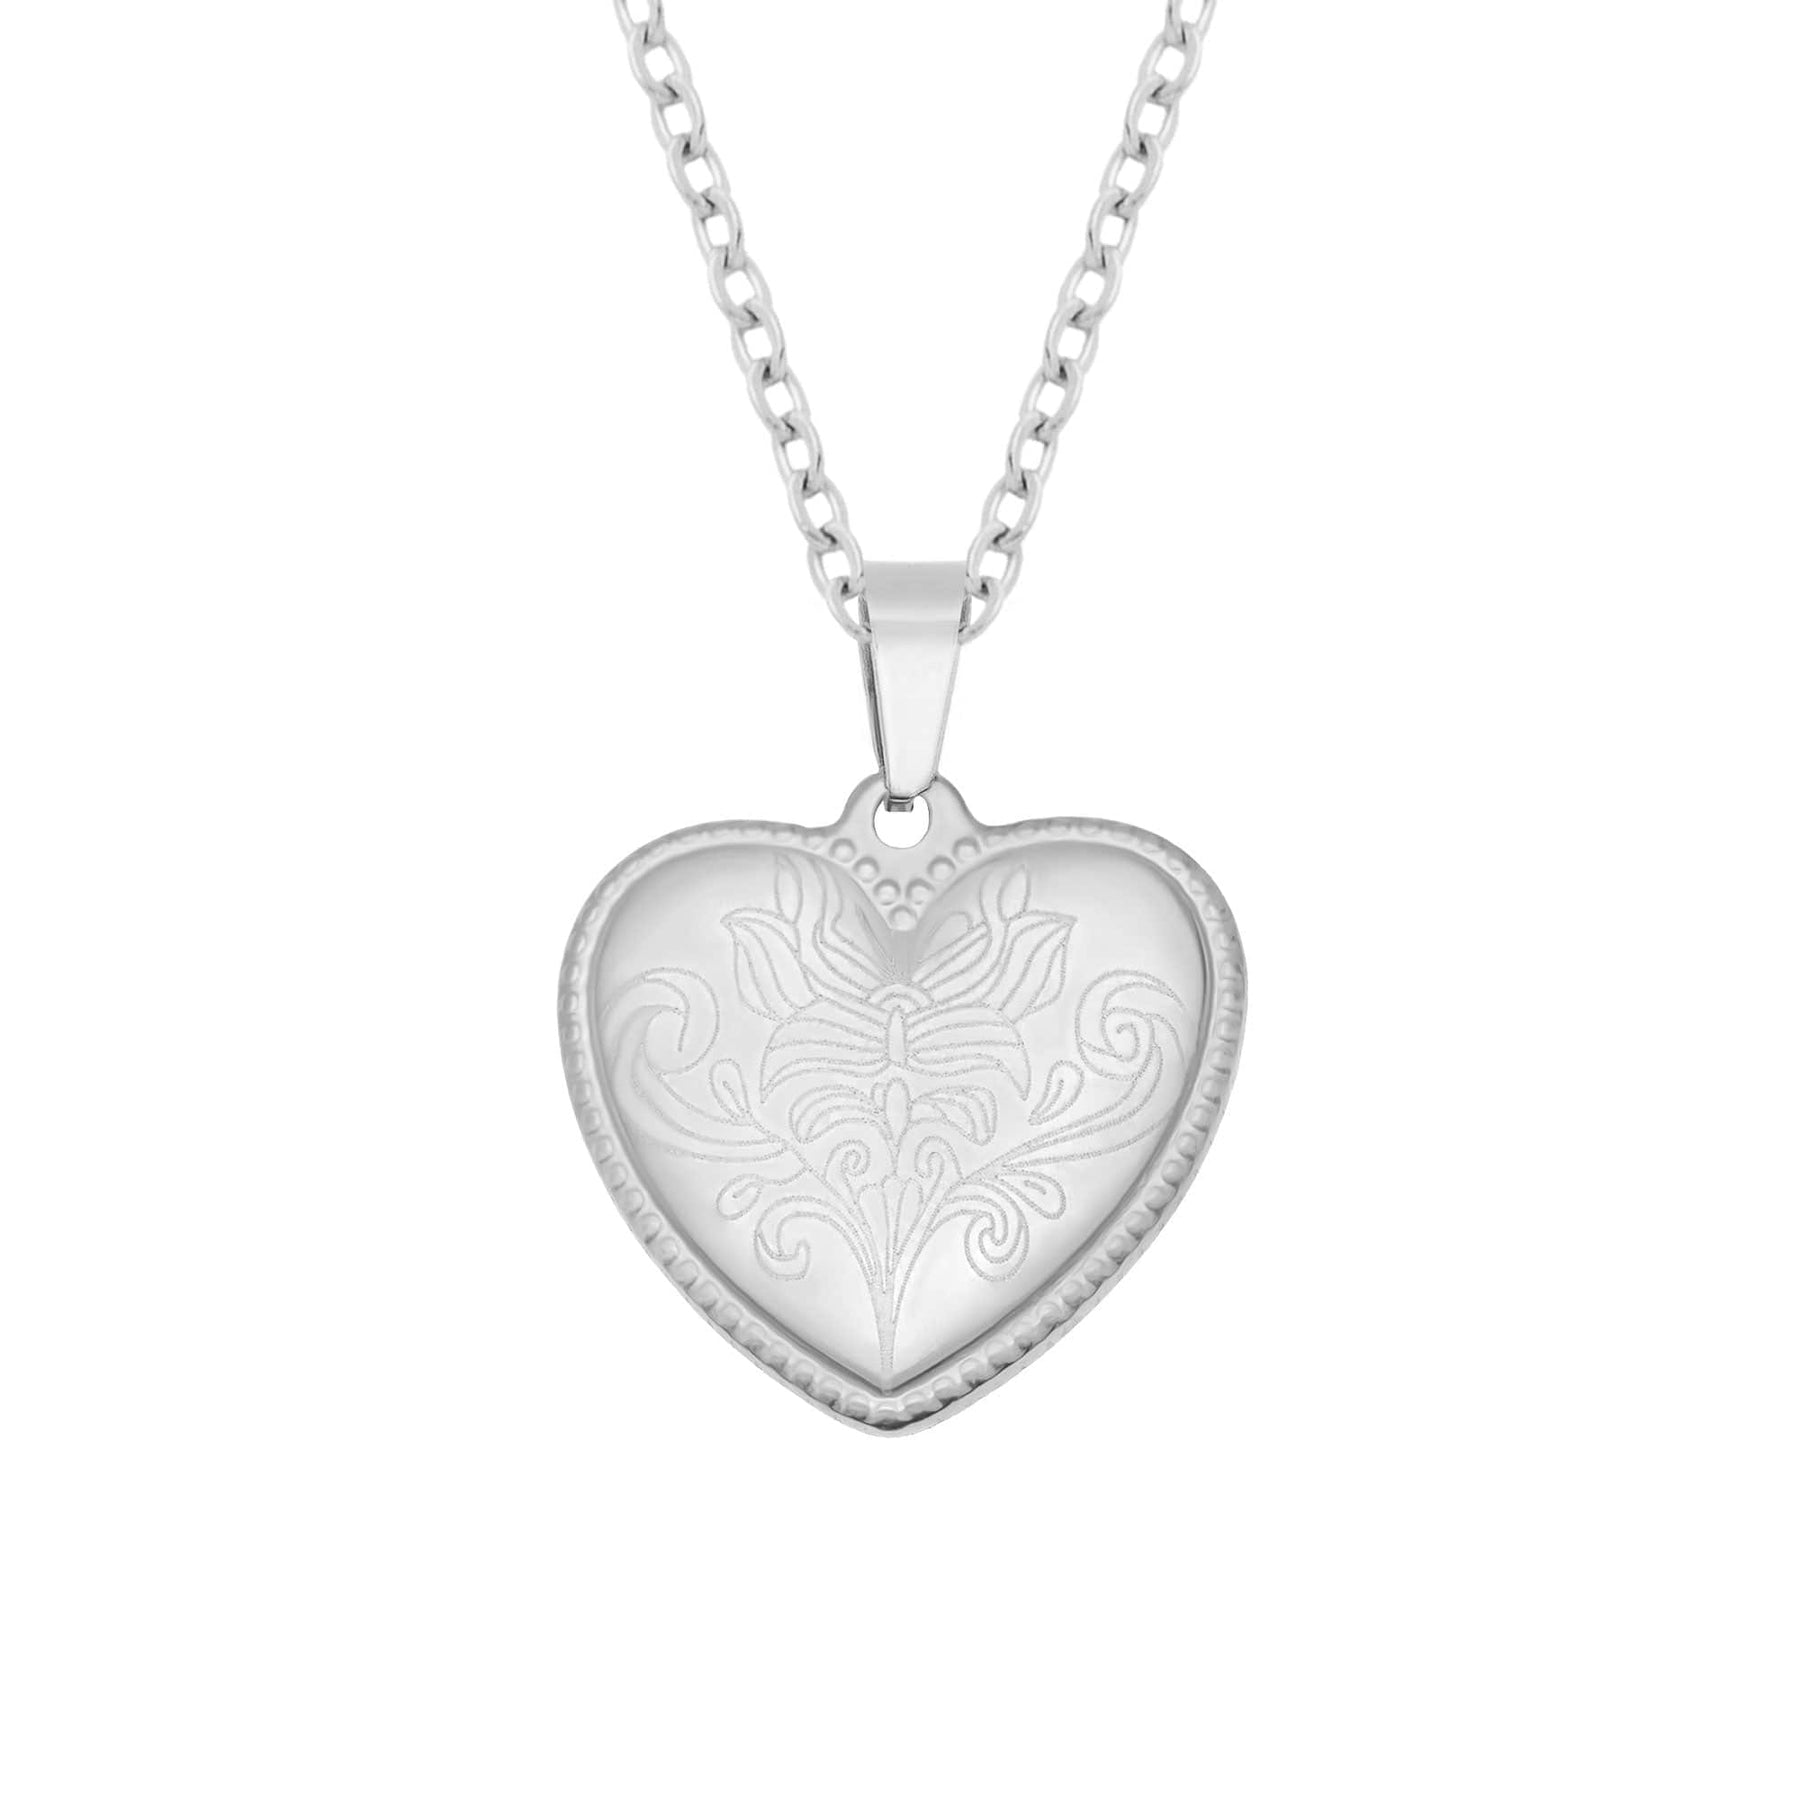 BohoMoon Stainless Steel Engraved Heart Necklace Silver